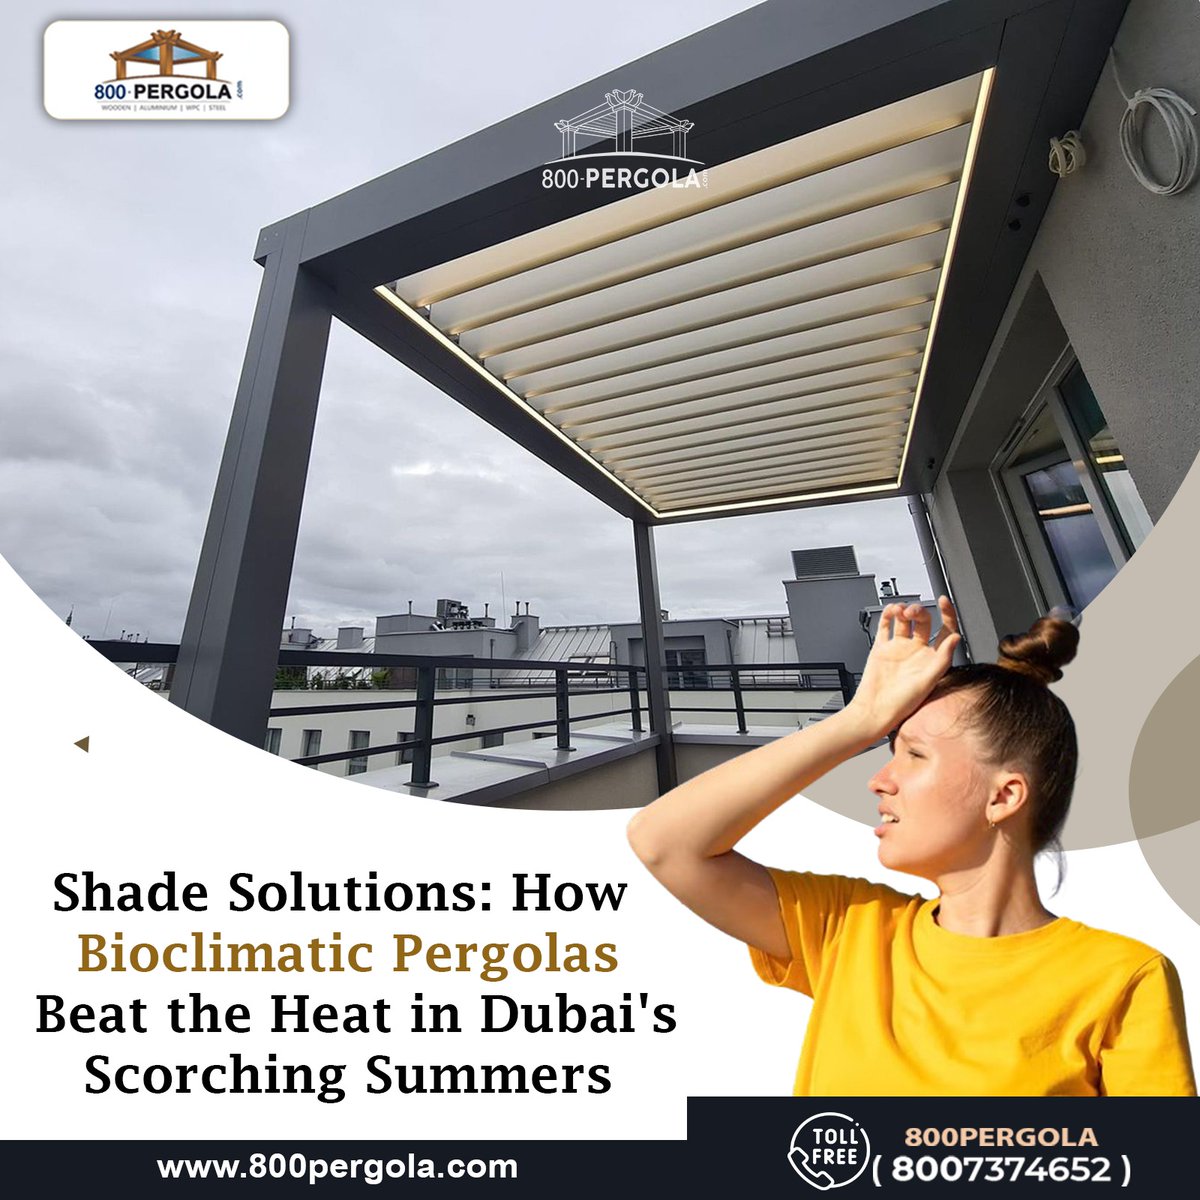 Craving relief from #Dubai's relentless #summer sun? ☀️ Dive into the ultimate #shadesolution: #BioclimaticPergolas!
🏡 Unlock the Power of #Shade:

✅ #EfficientCooling
✅ #SustainableLiving
✅ Tailored #Comfort
✅ #yearRoundEnjoyment

Call us📞+971 55 380 5148
#Dubai #Pergola